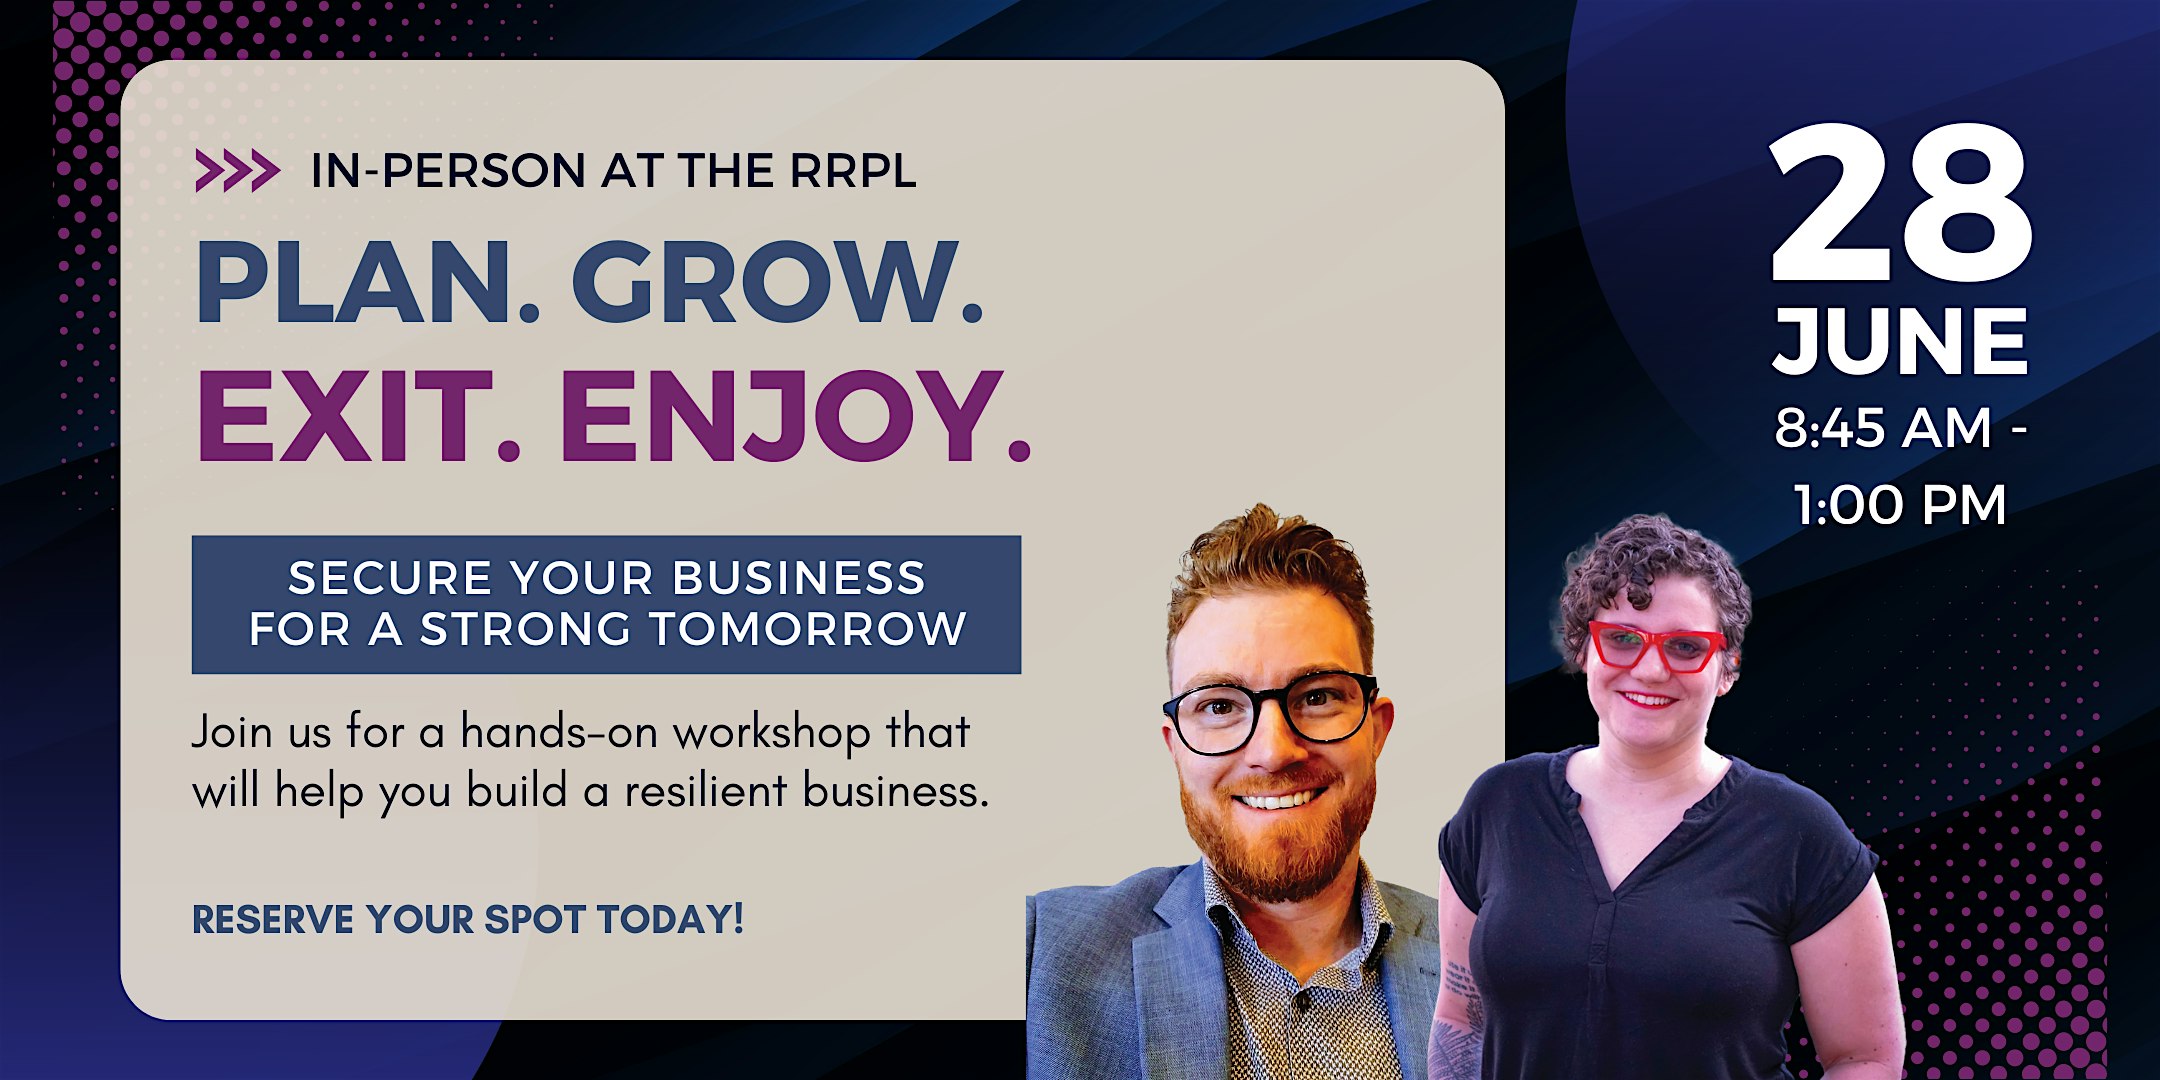 Plan. Grow. Exit. Enjoy. Secure Your Business for a Strong Tomorrow.